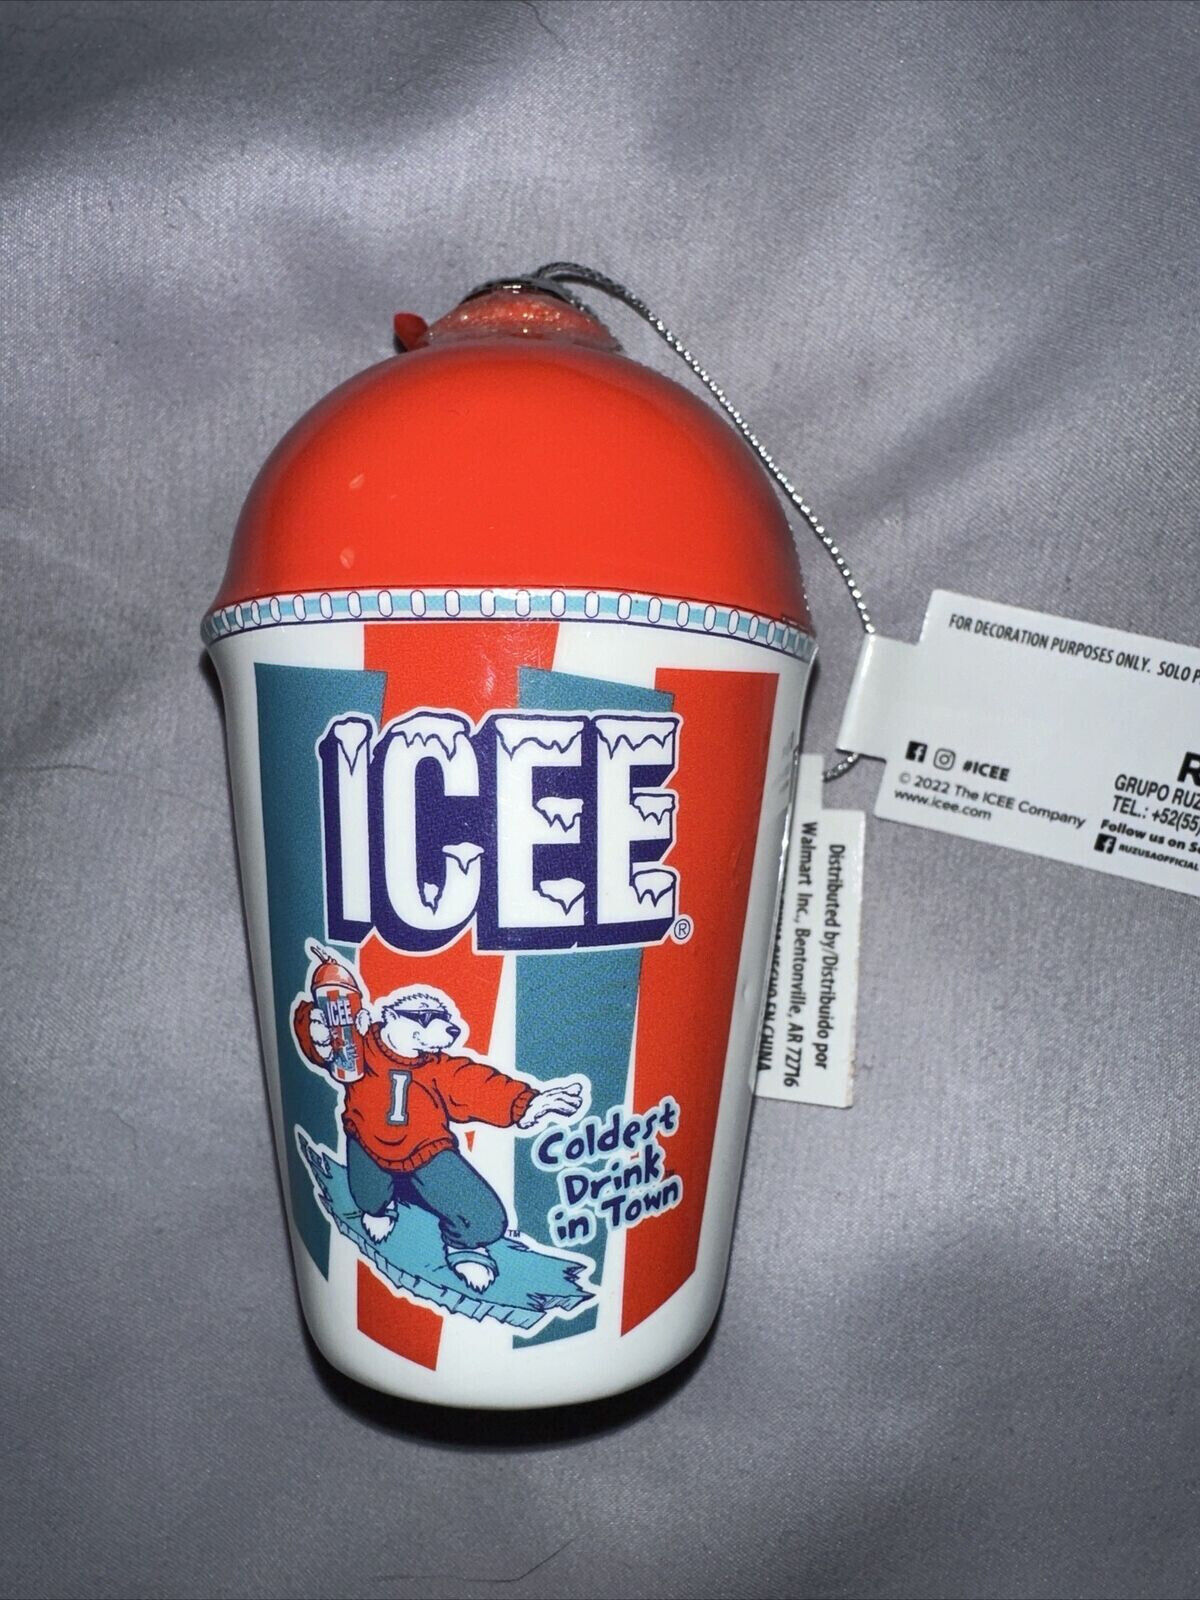 ICEE Coldest Drink in Town Tree Ornament Grupo Ruz Collection 2.25 X 2.25 X 4 in